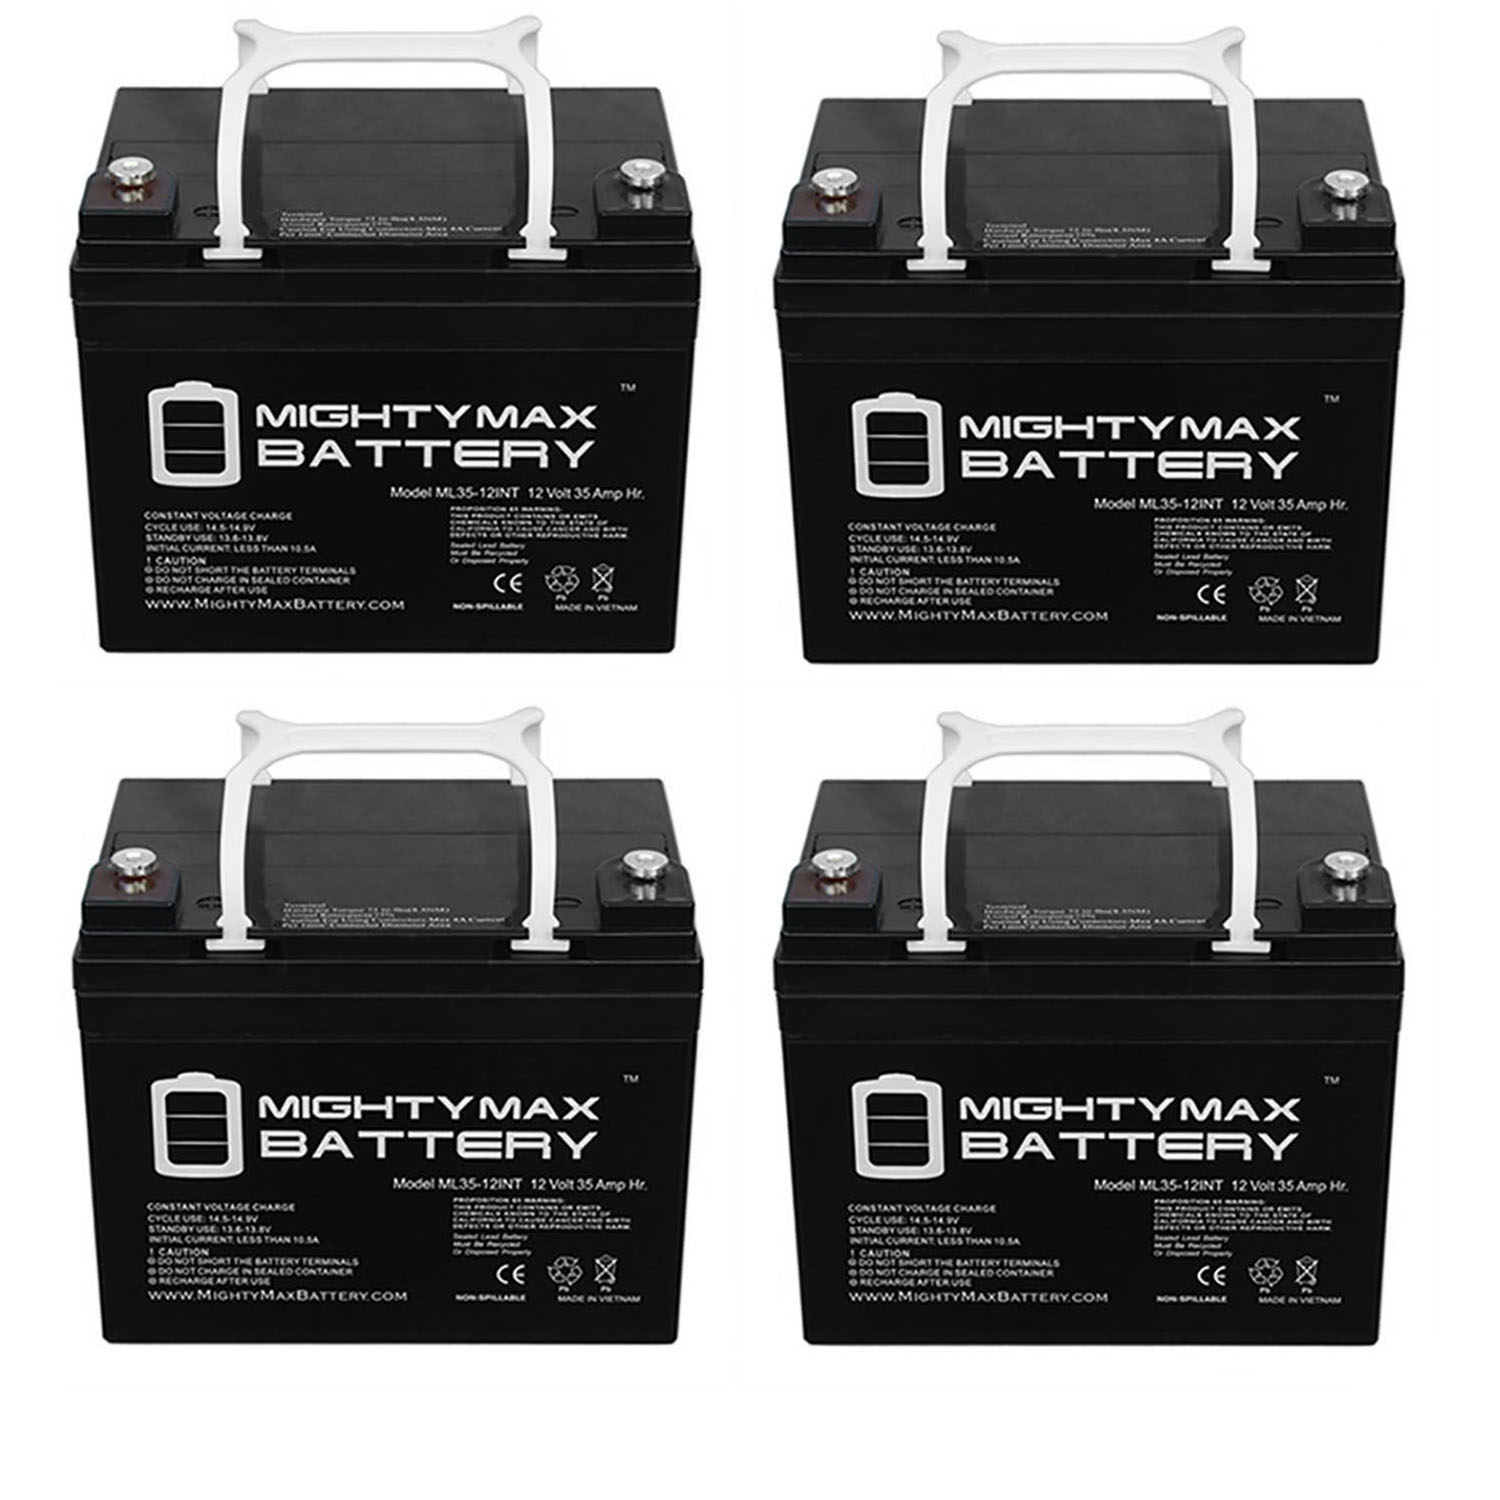 12V 35AH INT Replacement Battery for Cub Cadet 1772 - 4 Pack